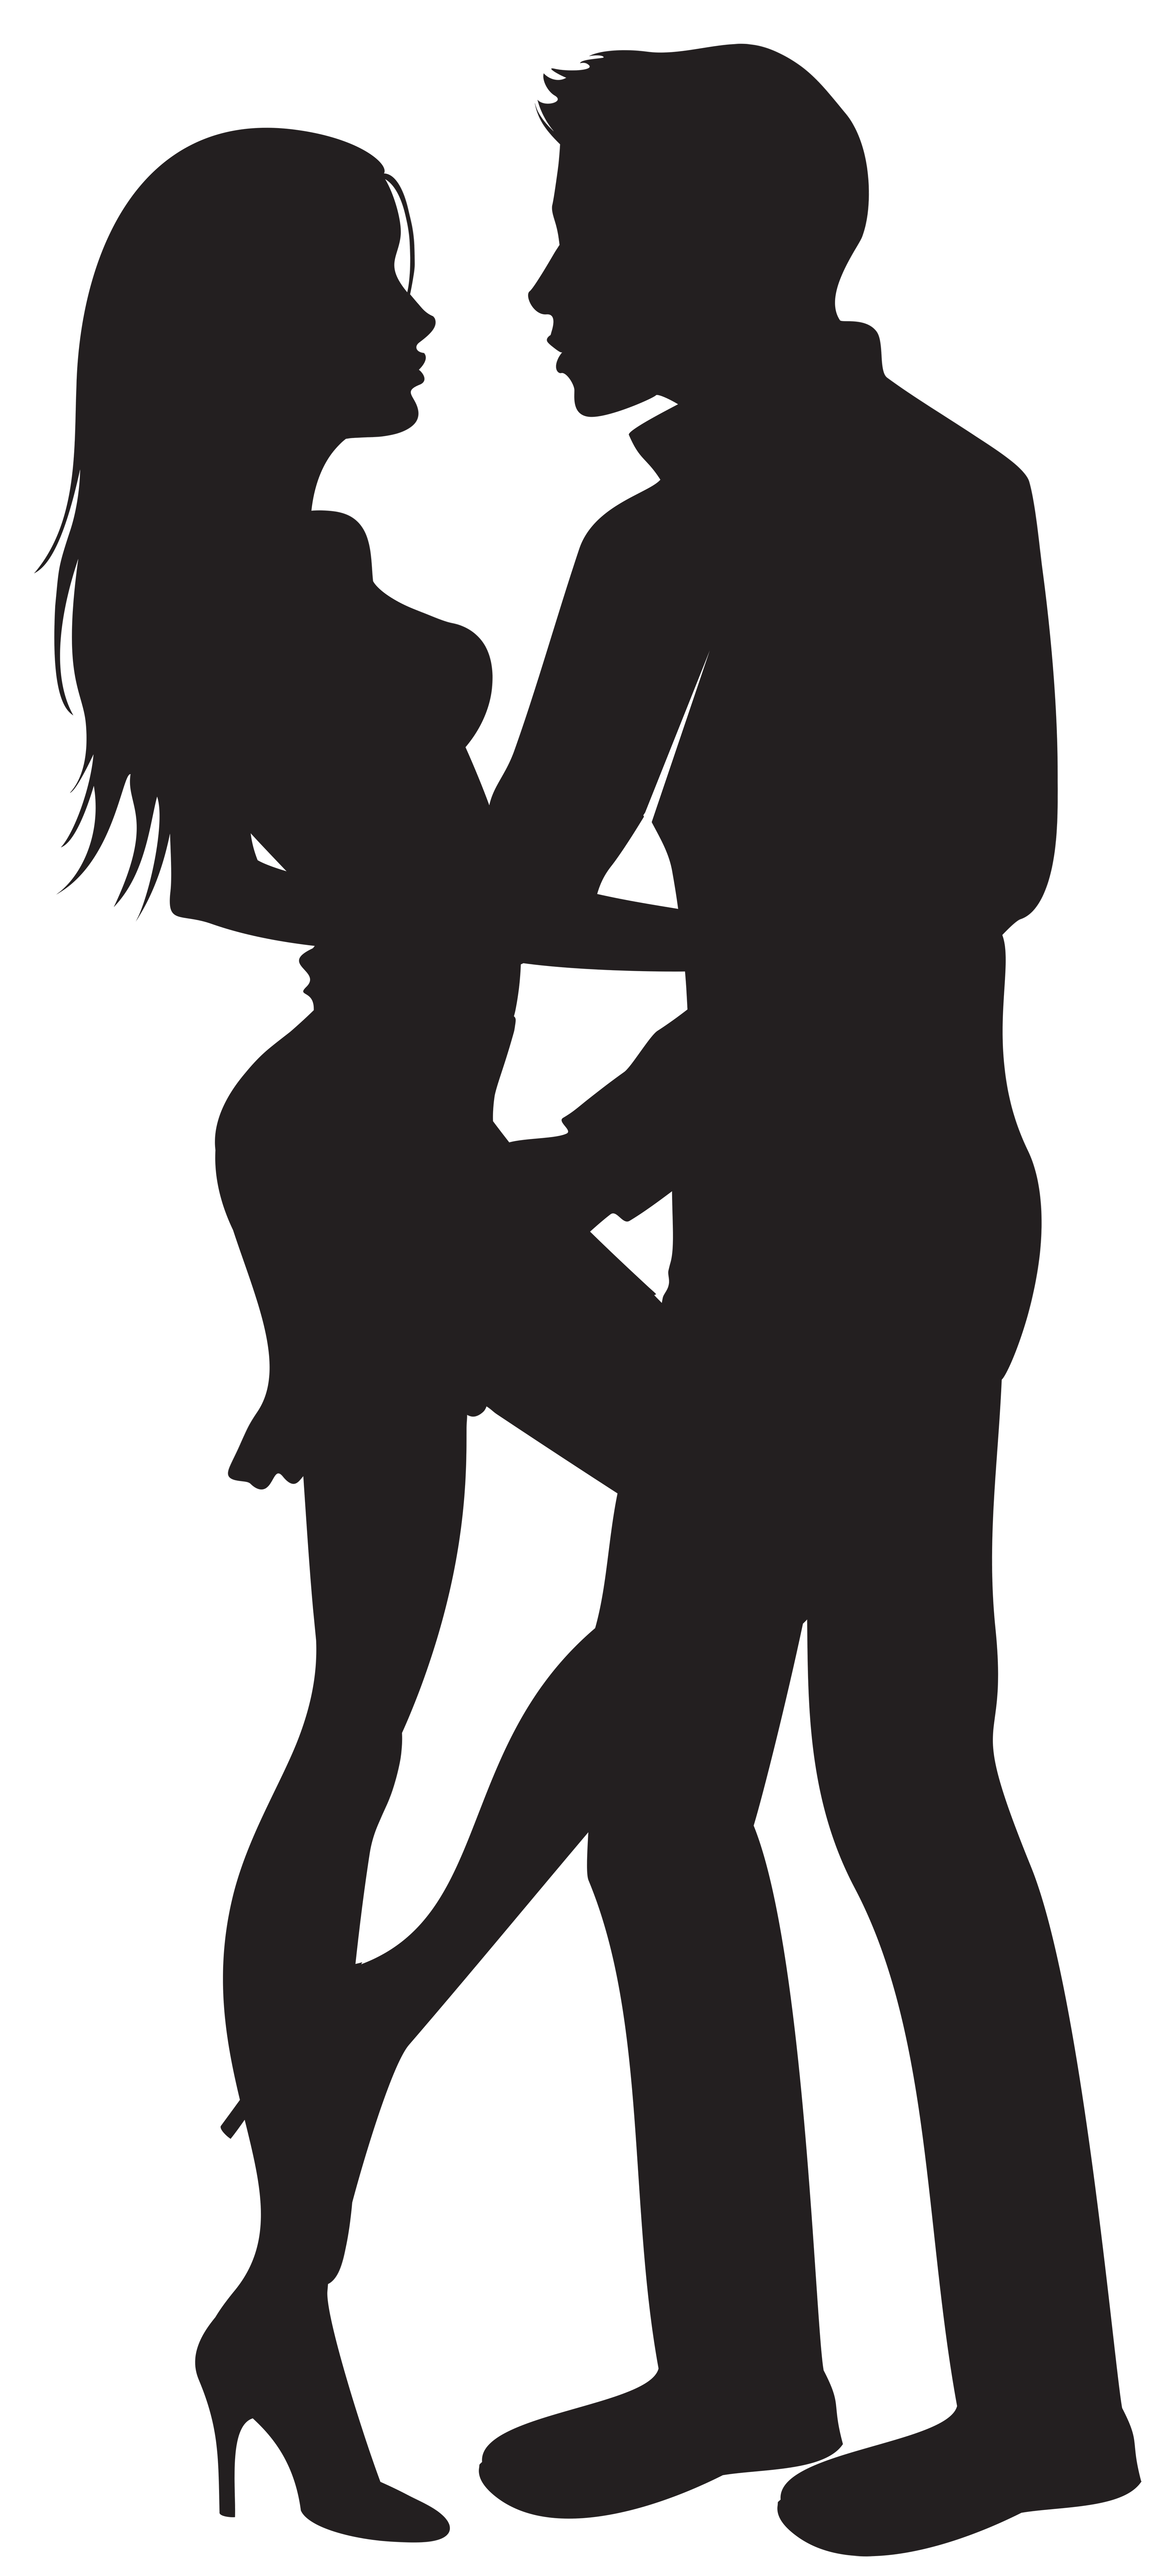 Couple Clip Art Couple Silhouettes Png Clip Art Image Png Download 3648 8000 Free